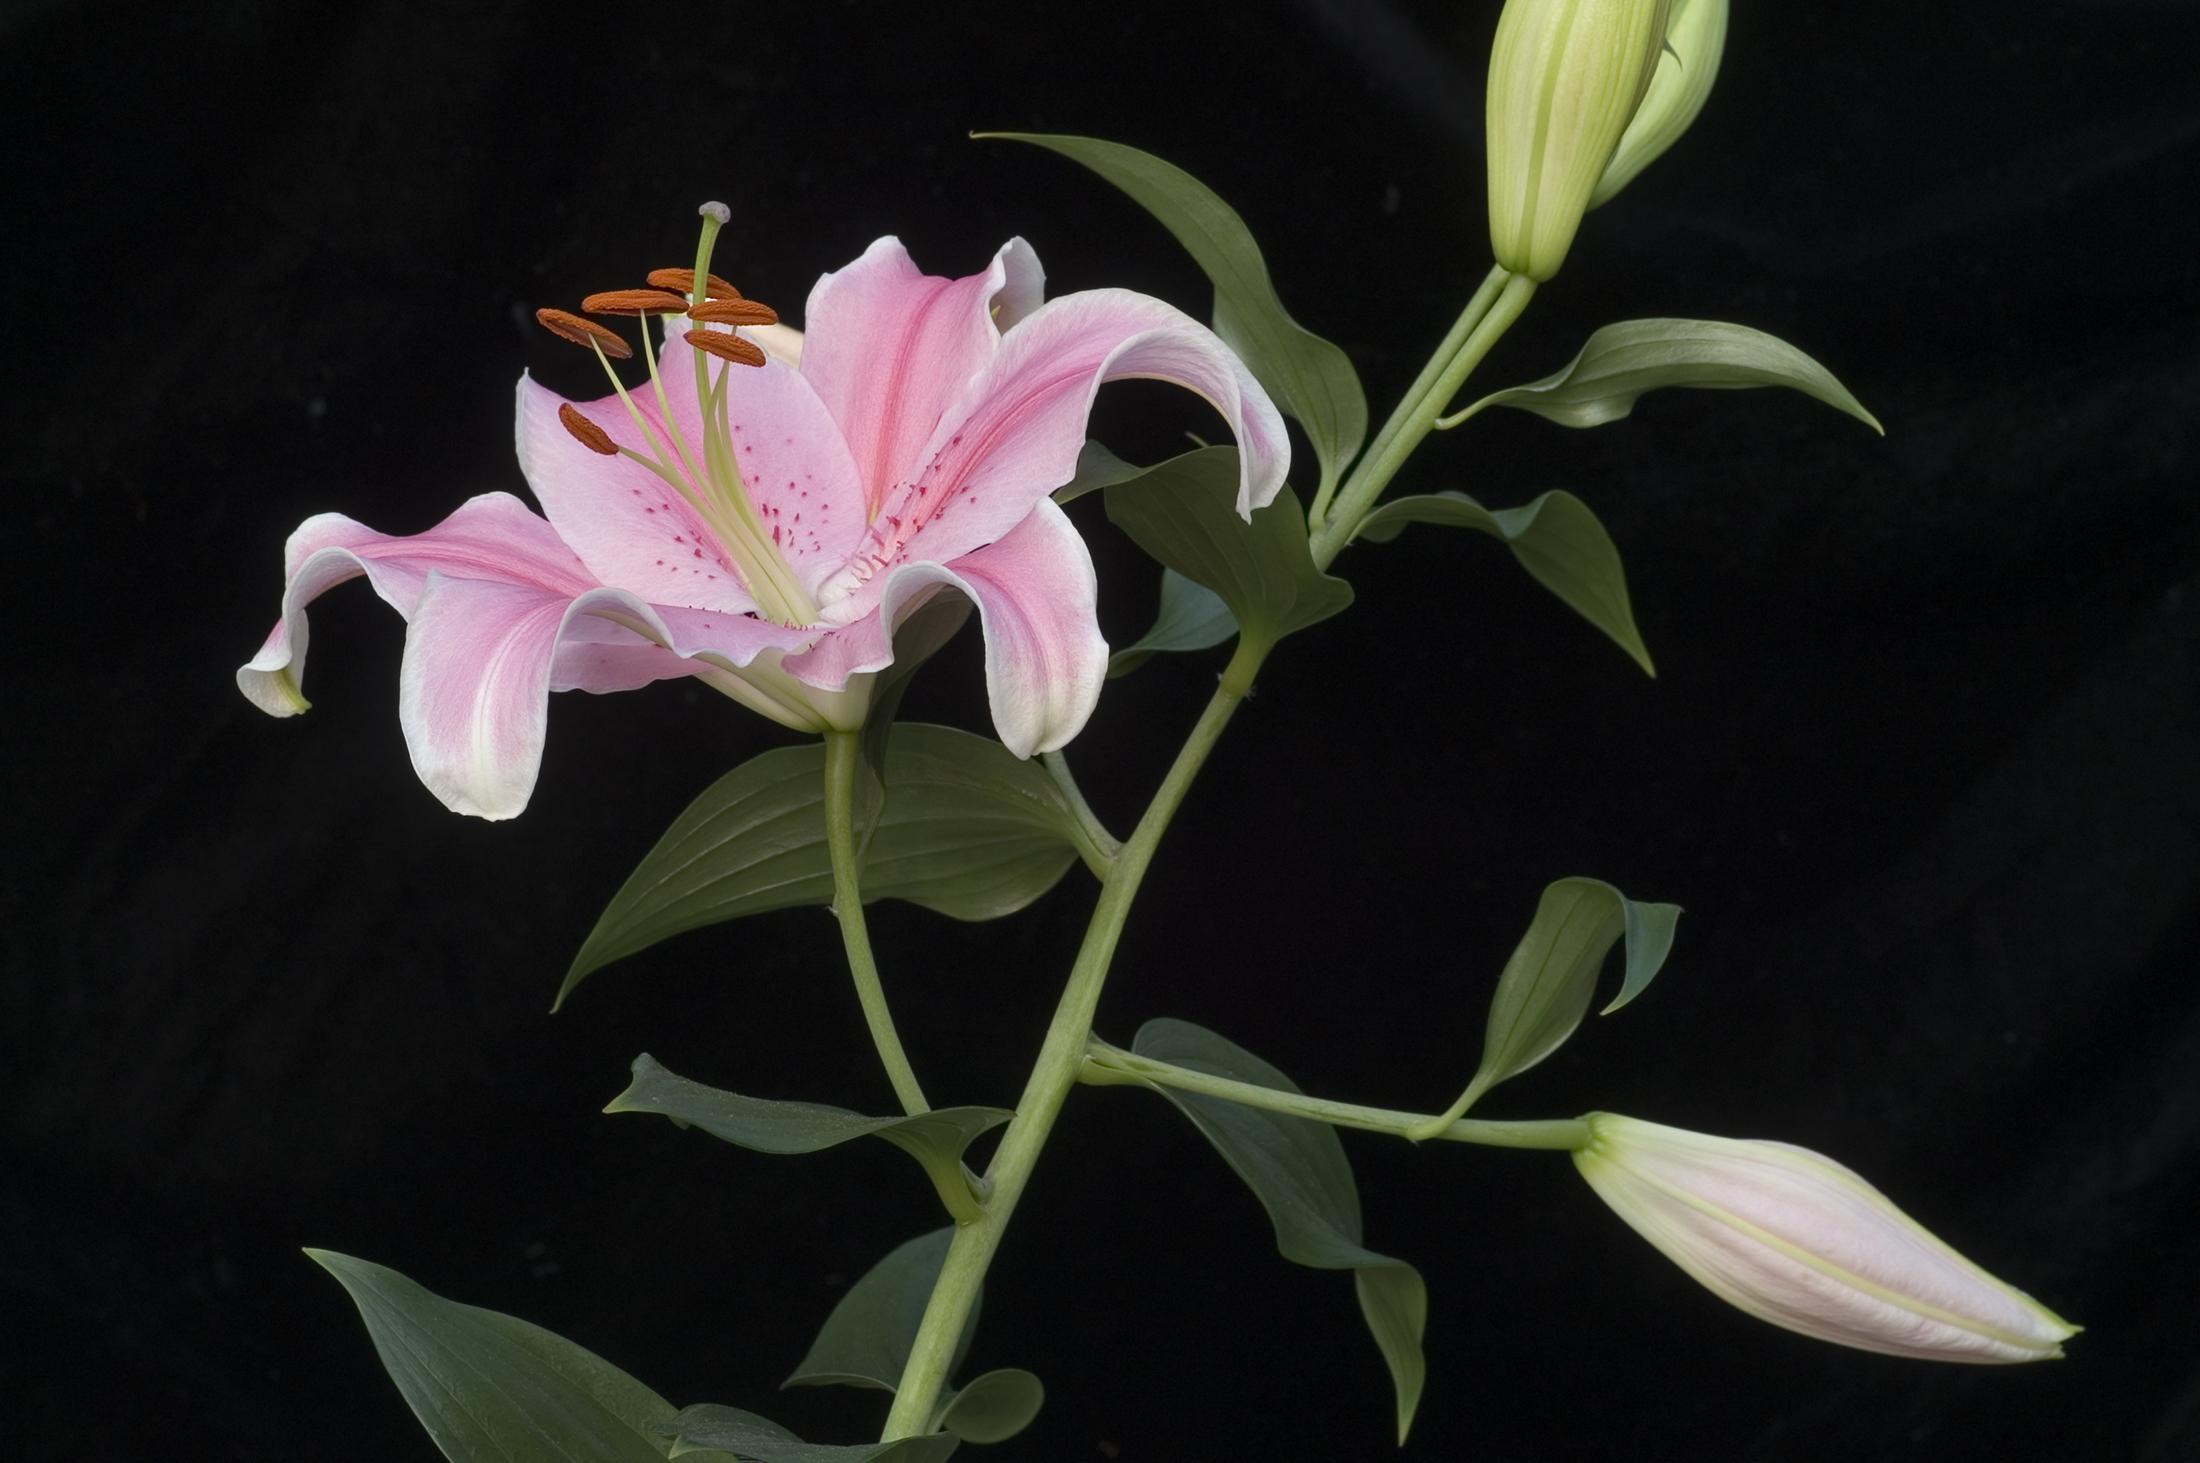 Oriental hybrid lily 'Sorbonne' flower and buds